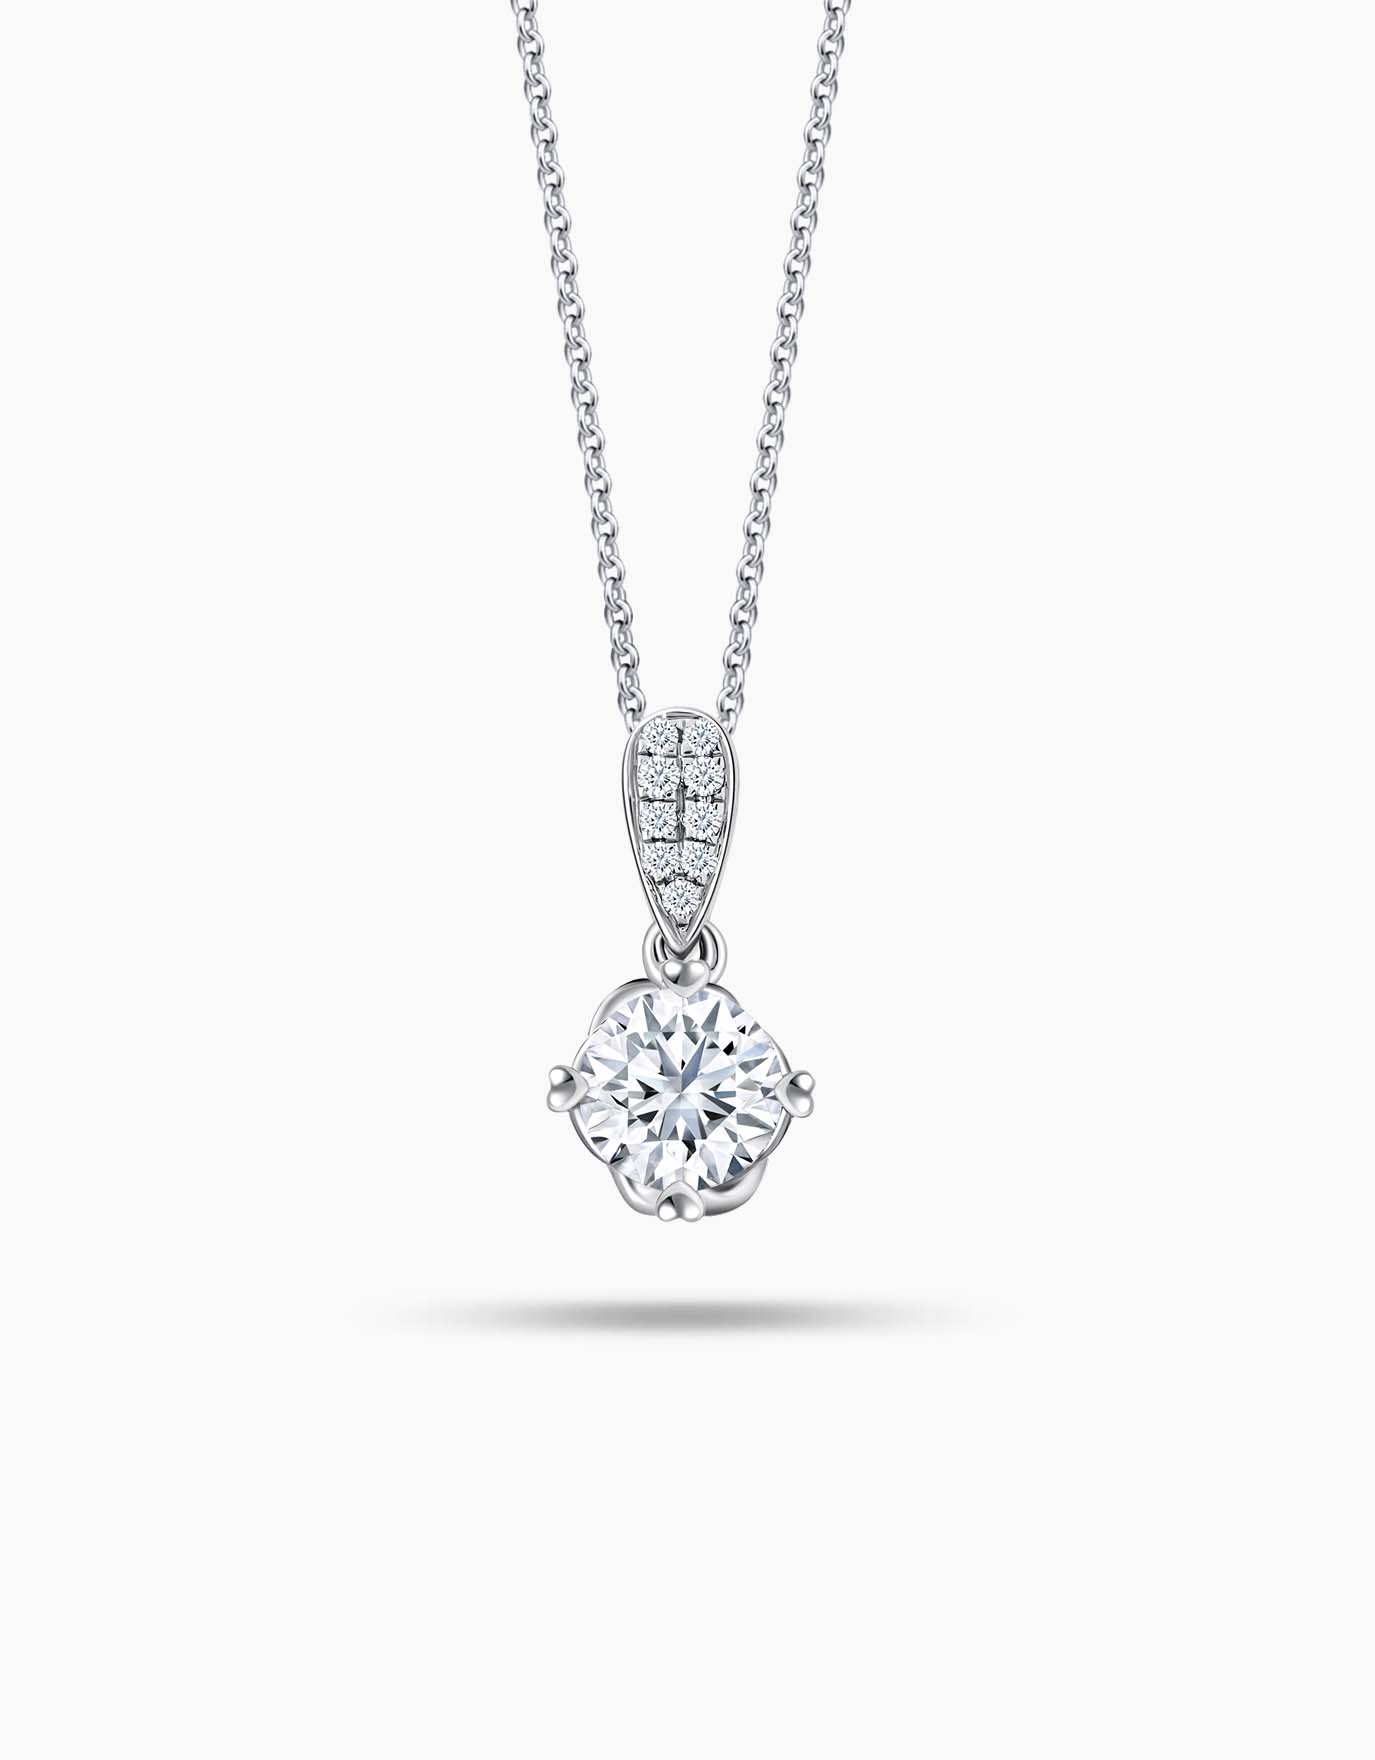 The Heart of Eternity Diamond: Value, Size, Images & History | Worthy